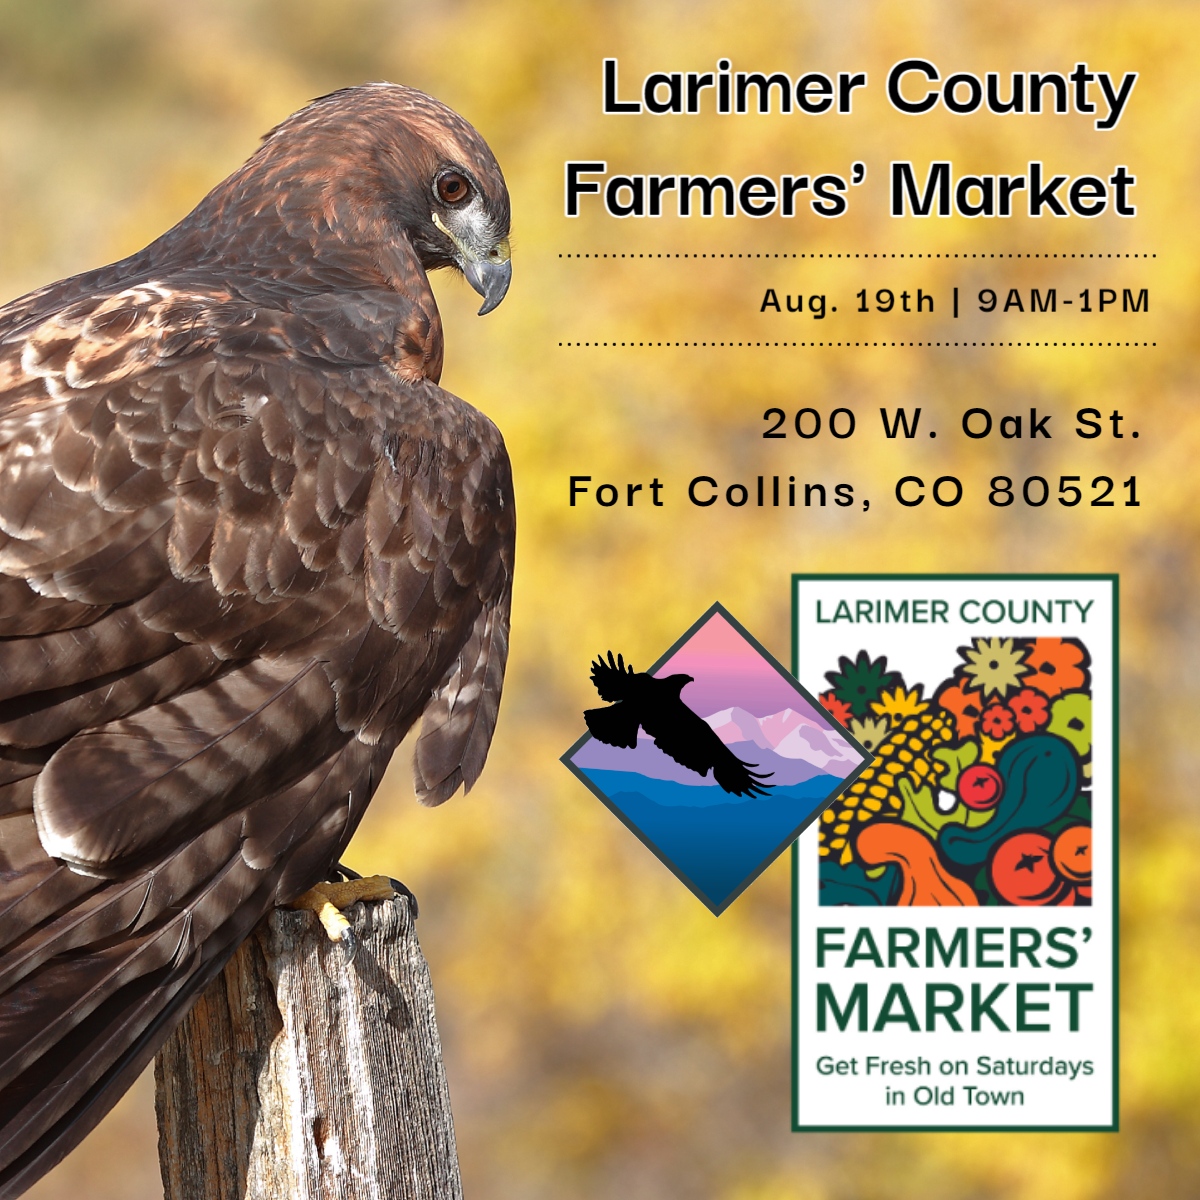 Join us tomorrow at the Larimer County Farmers' Market in Fort Collins! We'd love to meet you and teach you something new about raptors.

#local #fortcollins #familyfriendly #visitfortcollins #conservationeducation